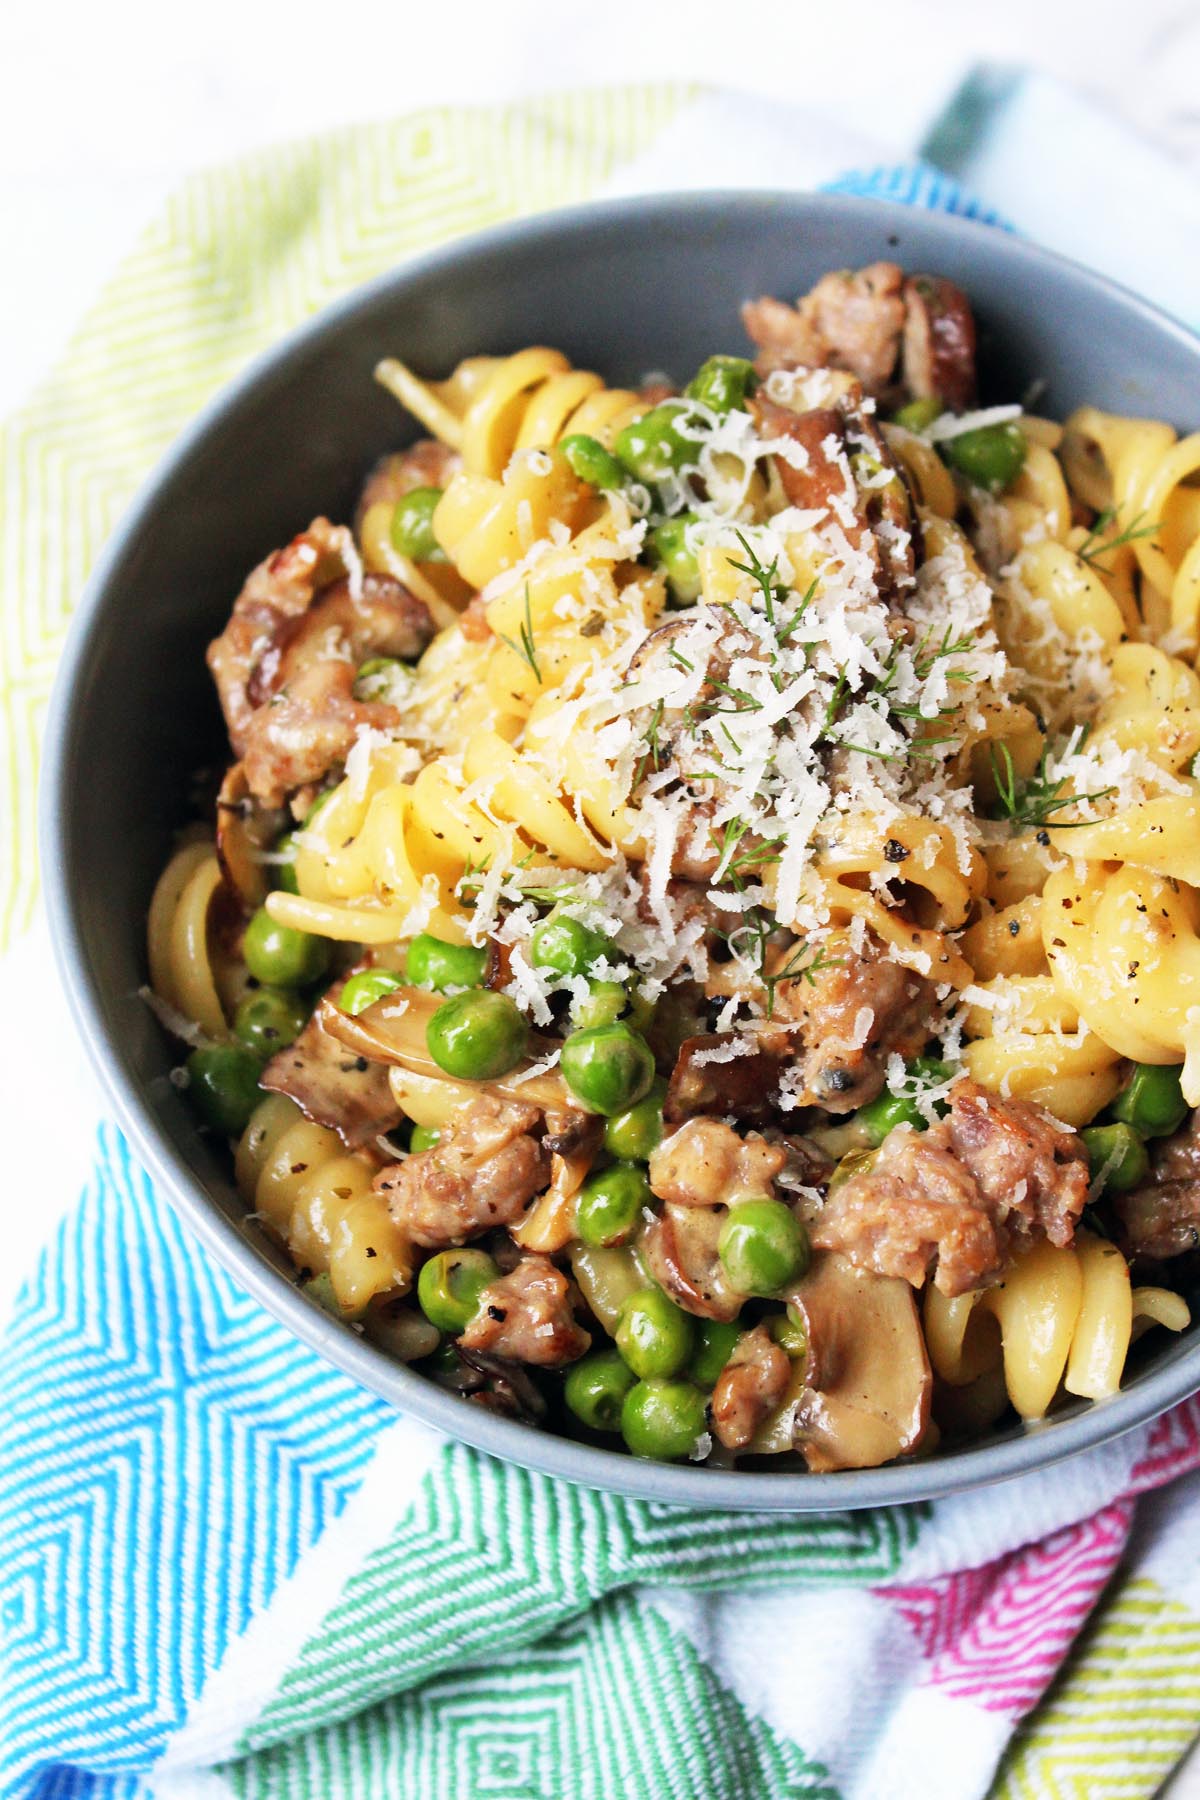 Fennel and Sausage Pasta is a quick and easy recipe perfect for midweek meals. Get the recipe from Supper in the Suburbs and cook it for dinner tonight!